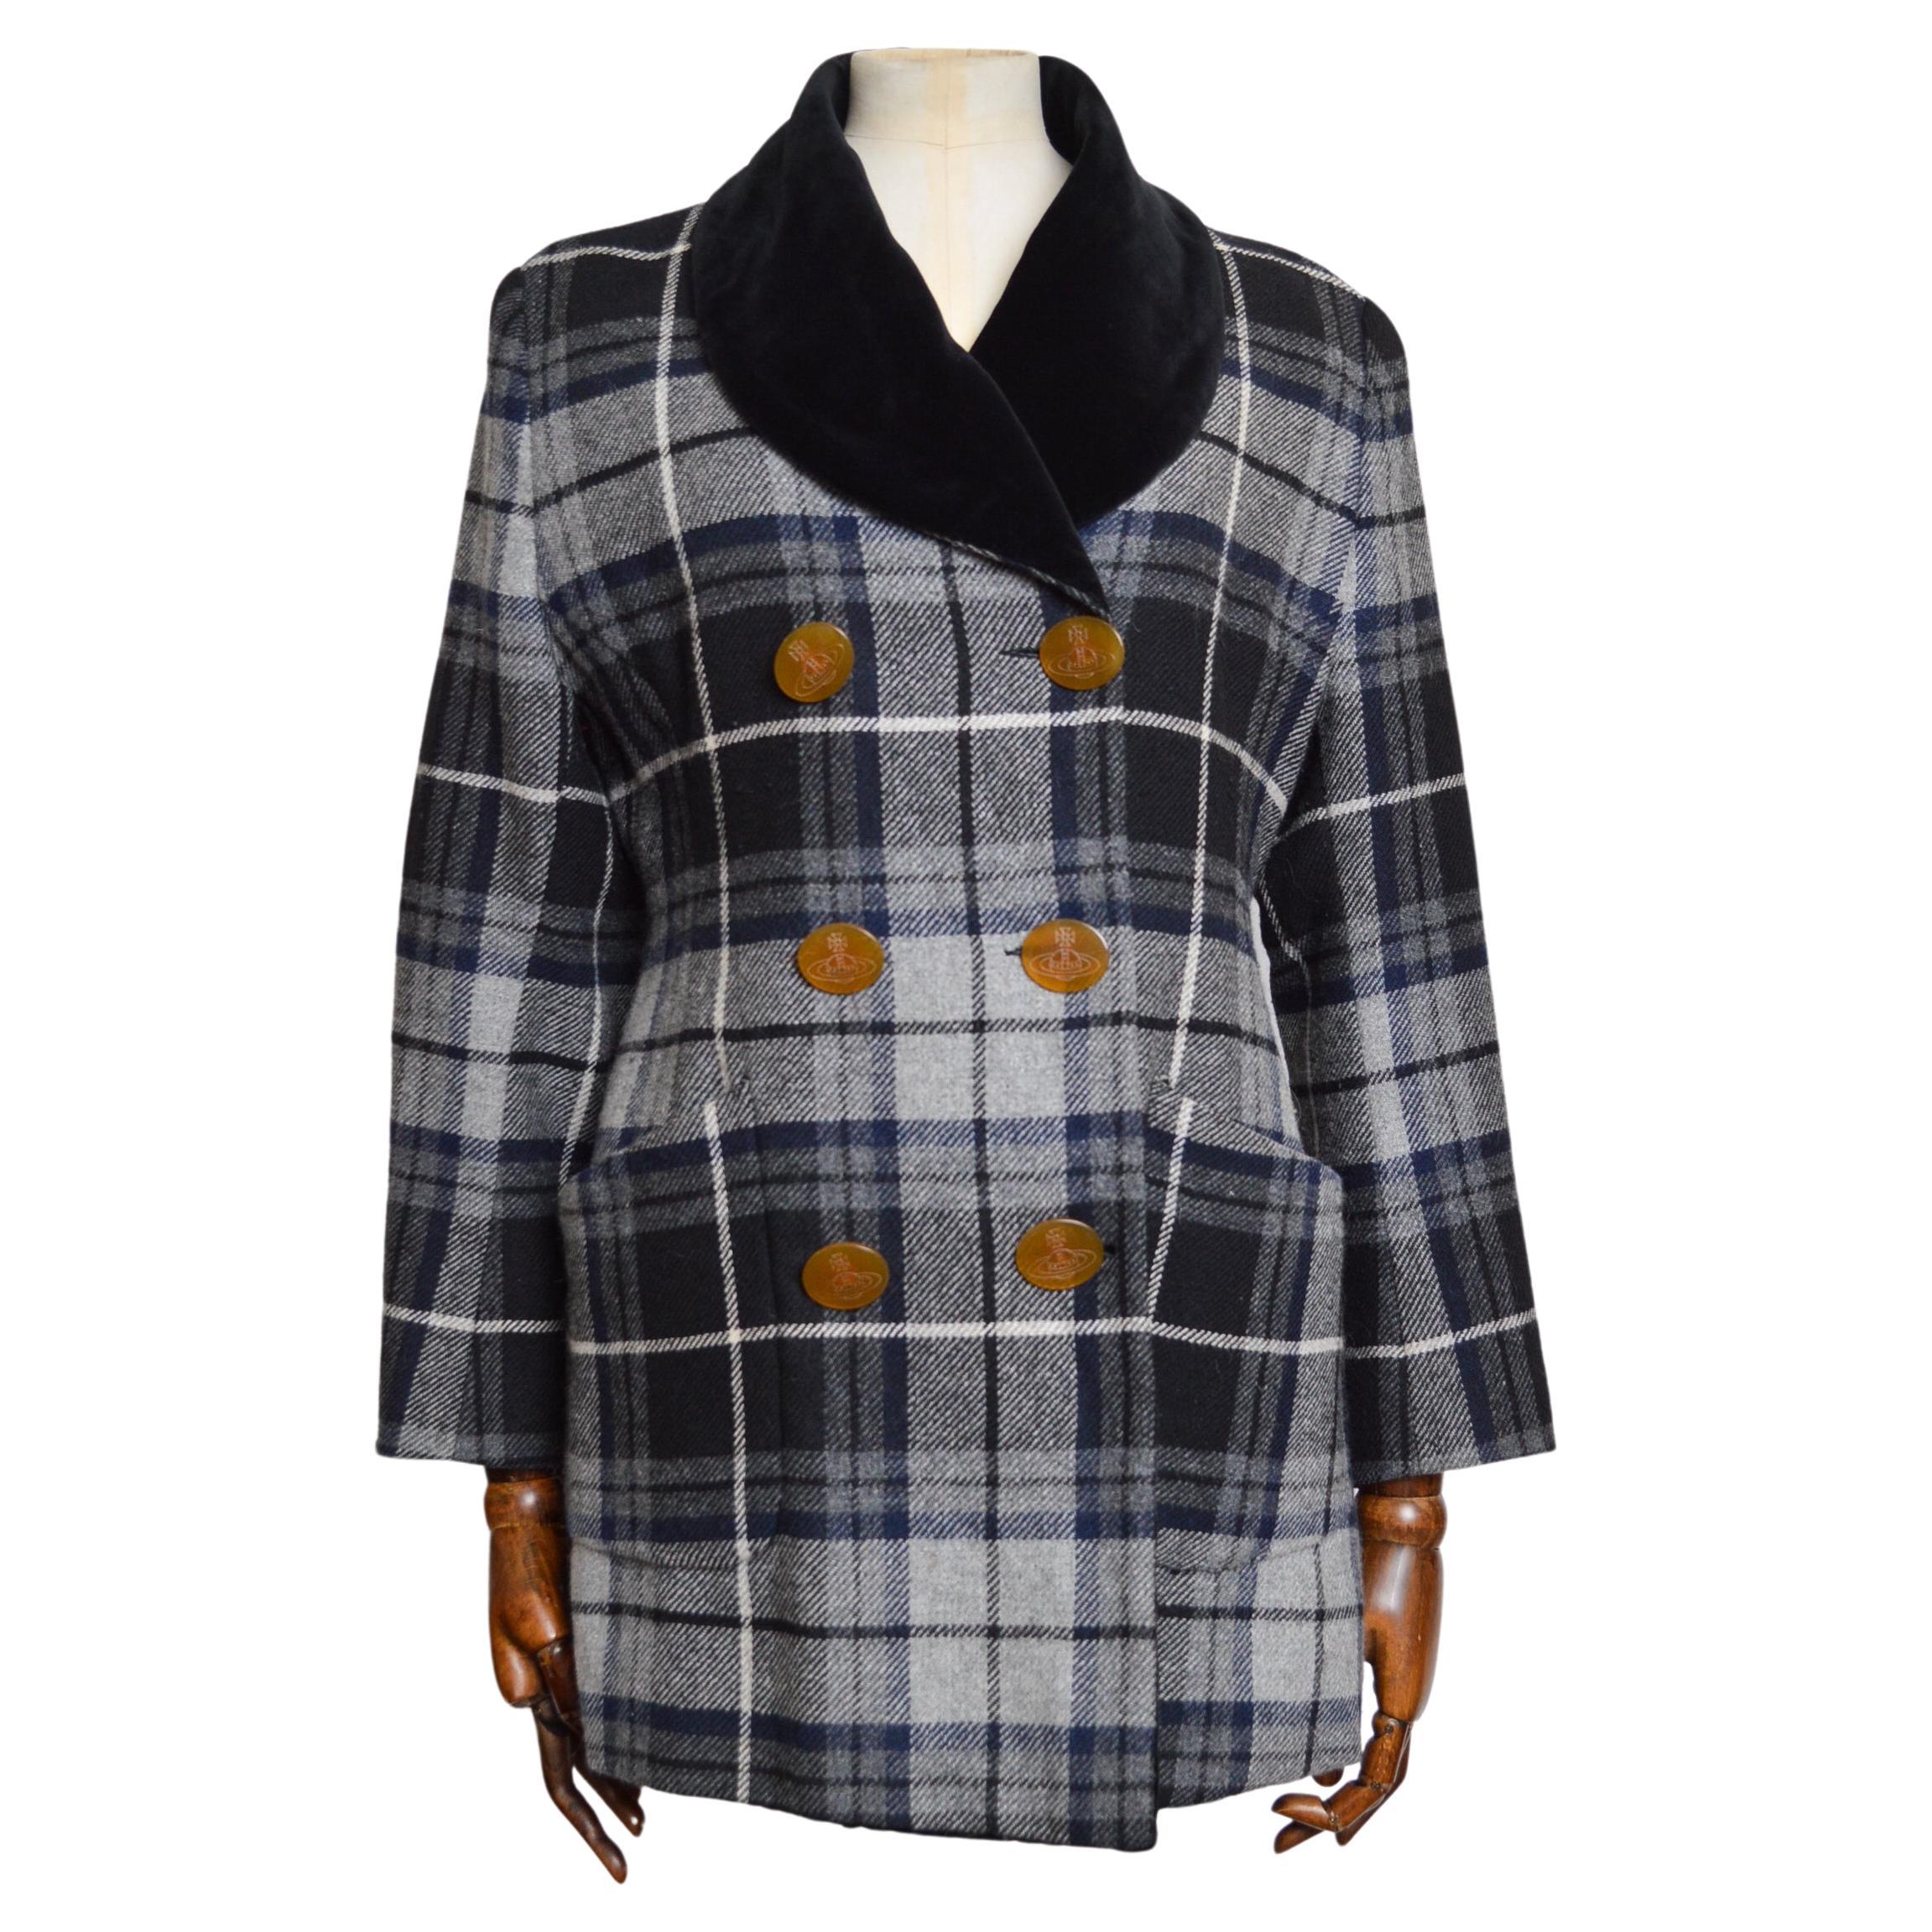 Rare Vivienne Westwood 3 Suisses AW 1995/ 1996 Collab Checked Tartan Wool Coat  For Sale